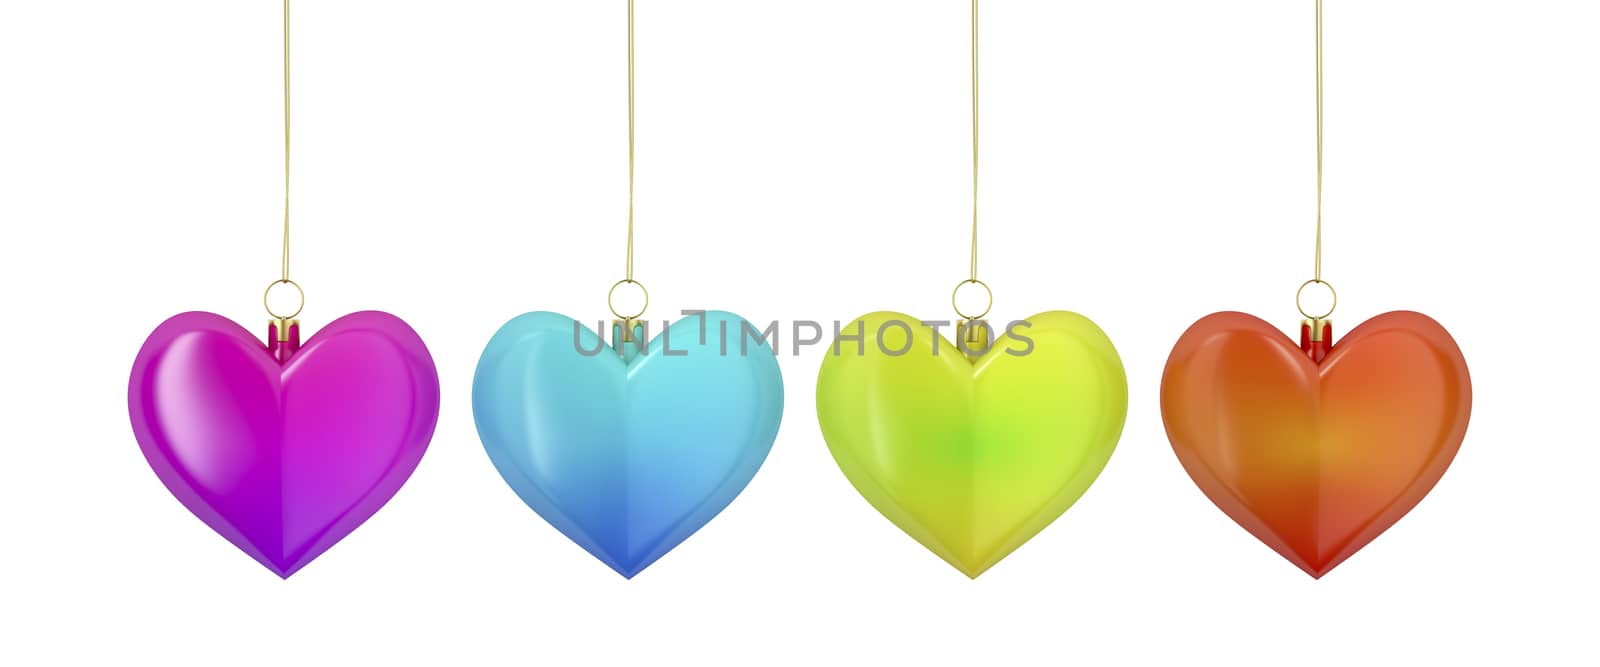 Heart shaped Christmas ornaments with different colors